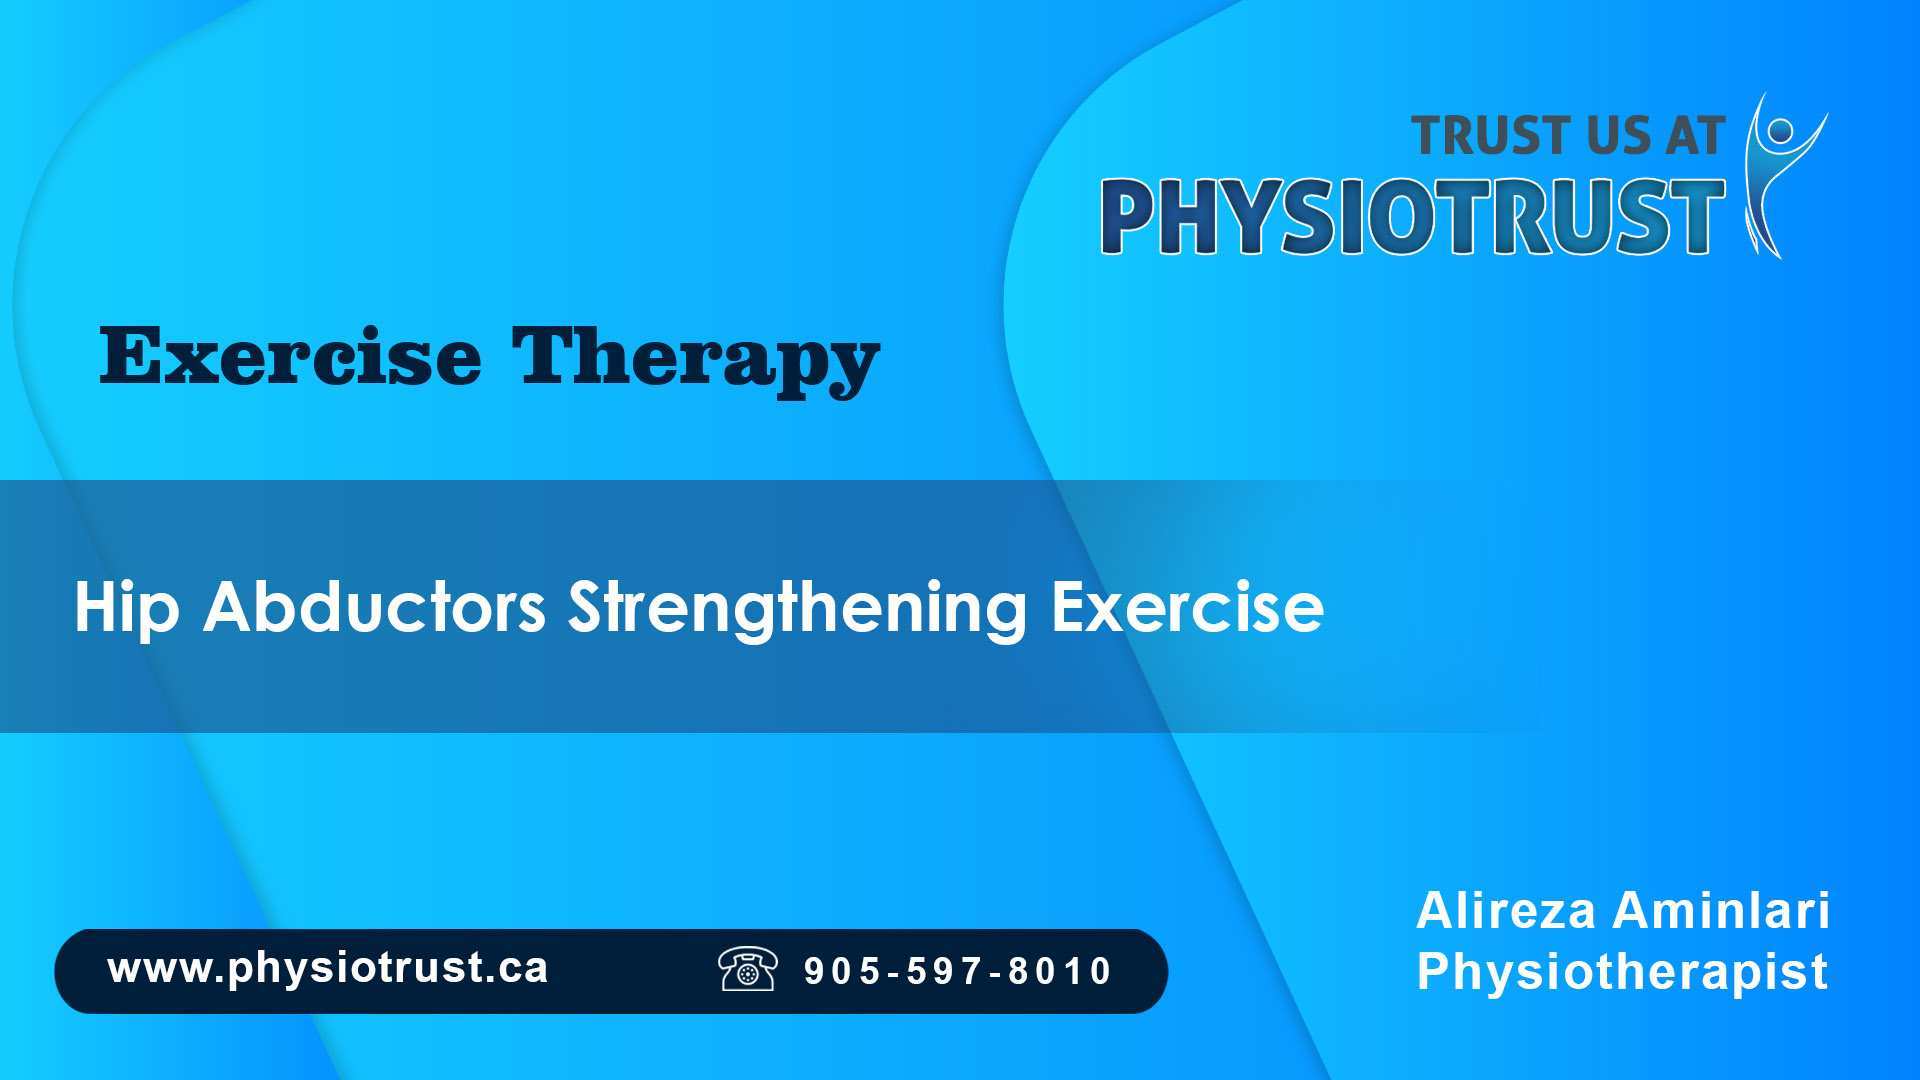 Hip Abductors Strengthening Exercise